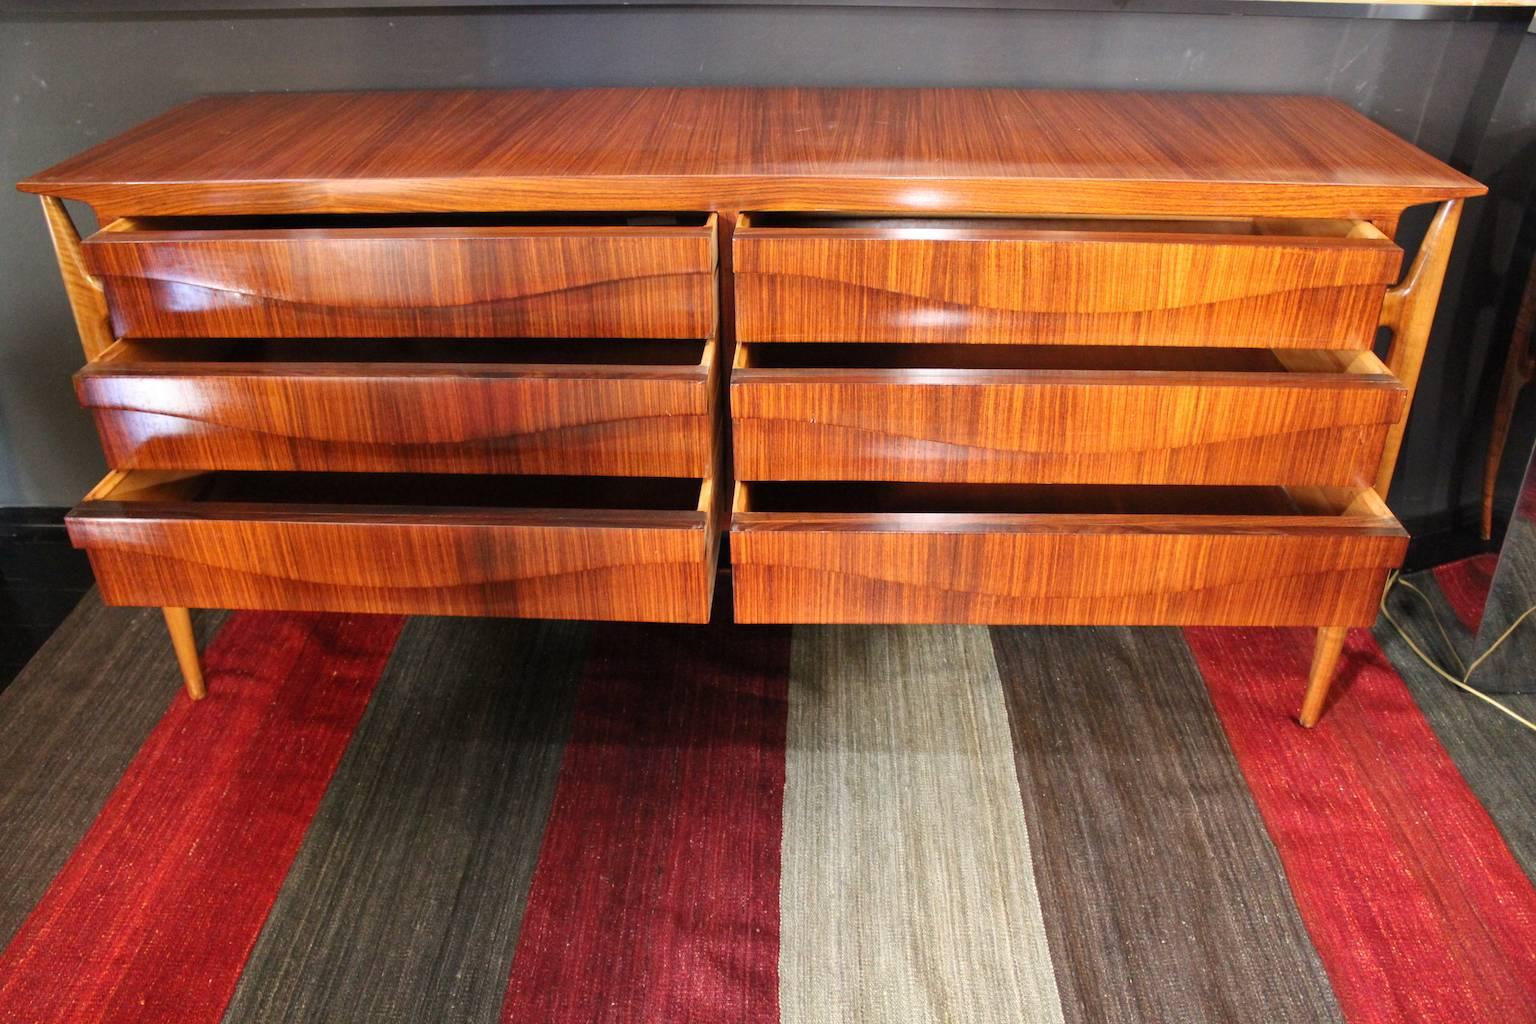 1960s rosewood and sycamore chest of drawers.

It is an article that requires CITES certification and the shipping costs for the USA are very high